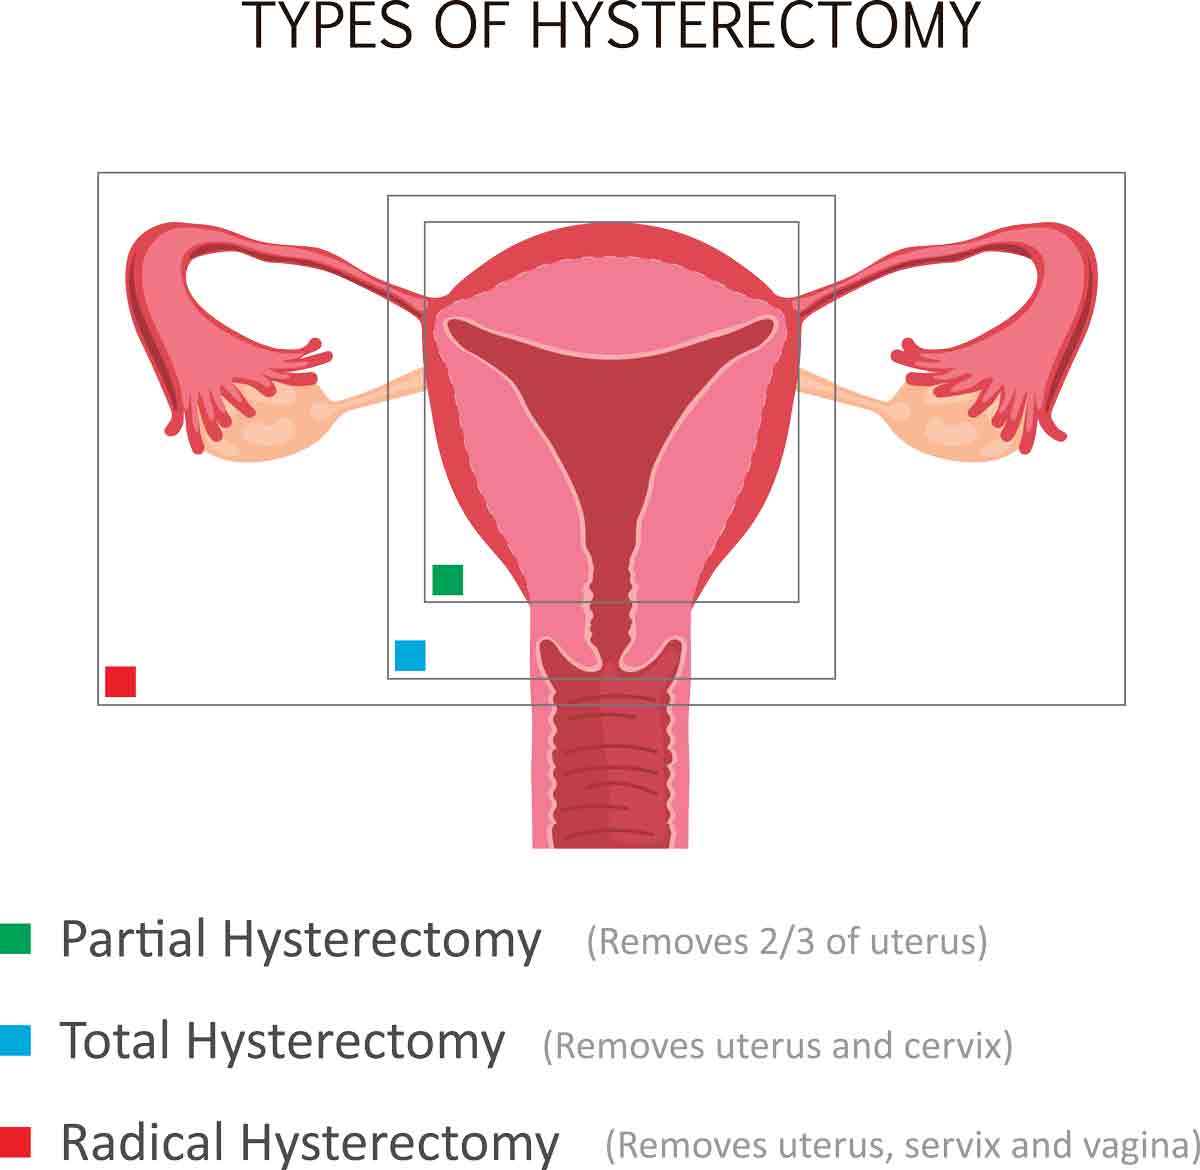 Types of Hysterectomy  - Partial, Total and Radical